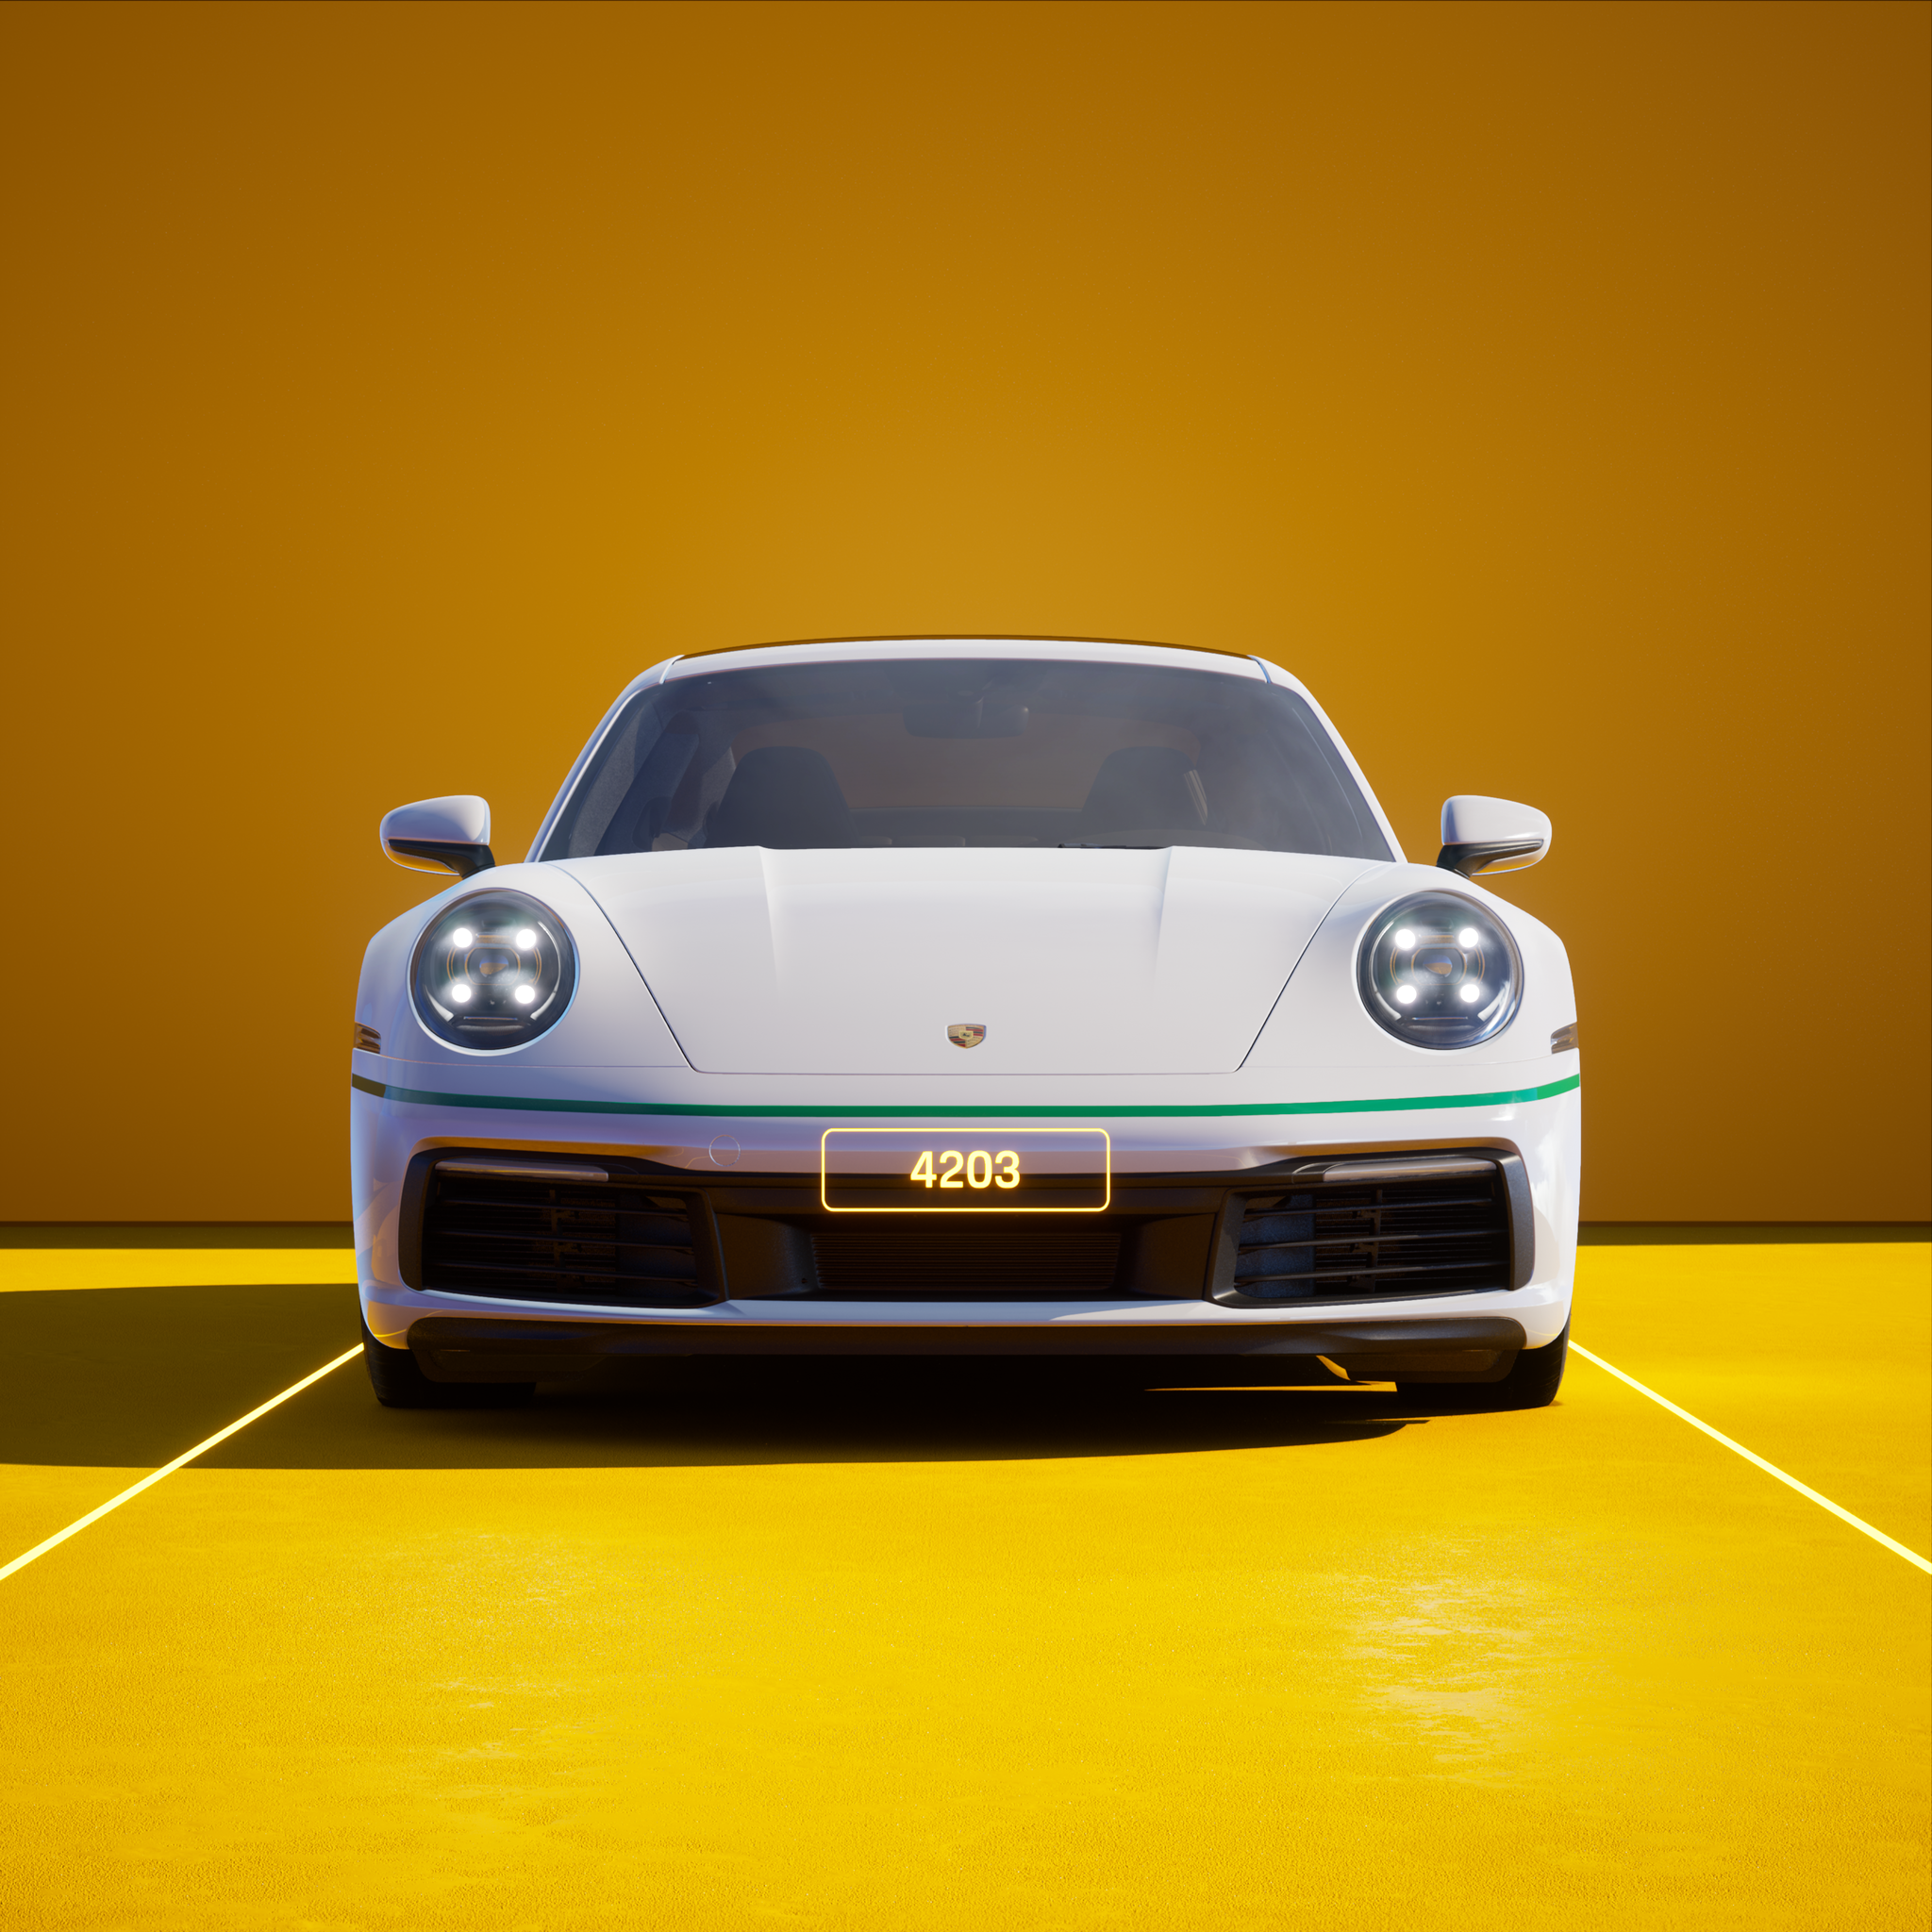 The PORSCHΞ 911 4203 image in phase